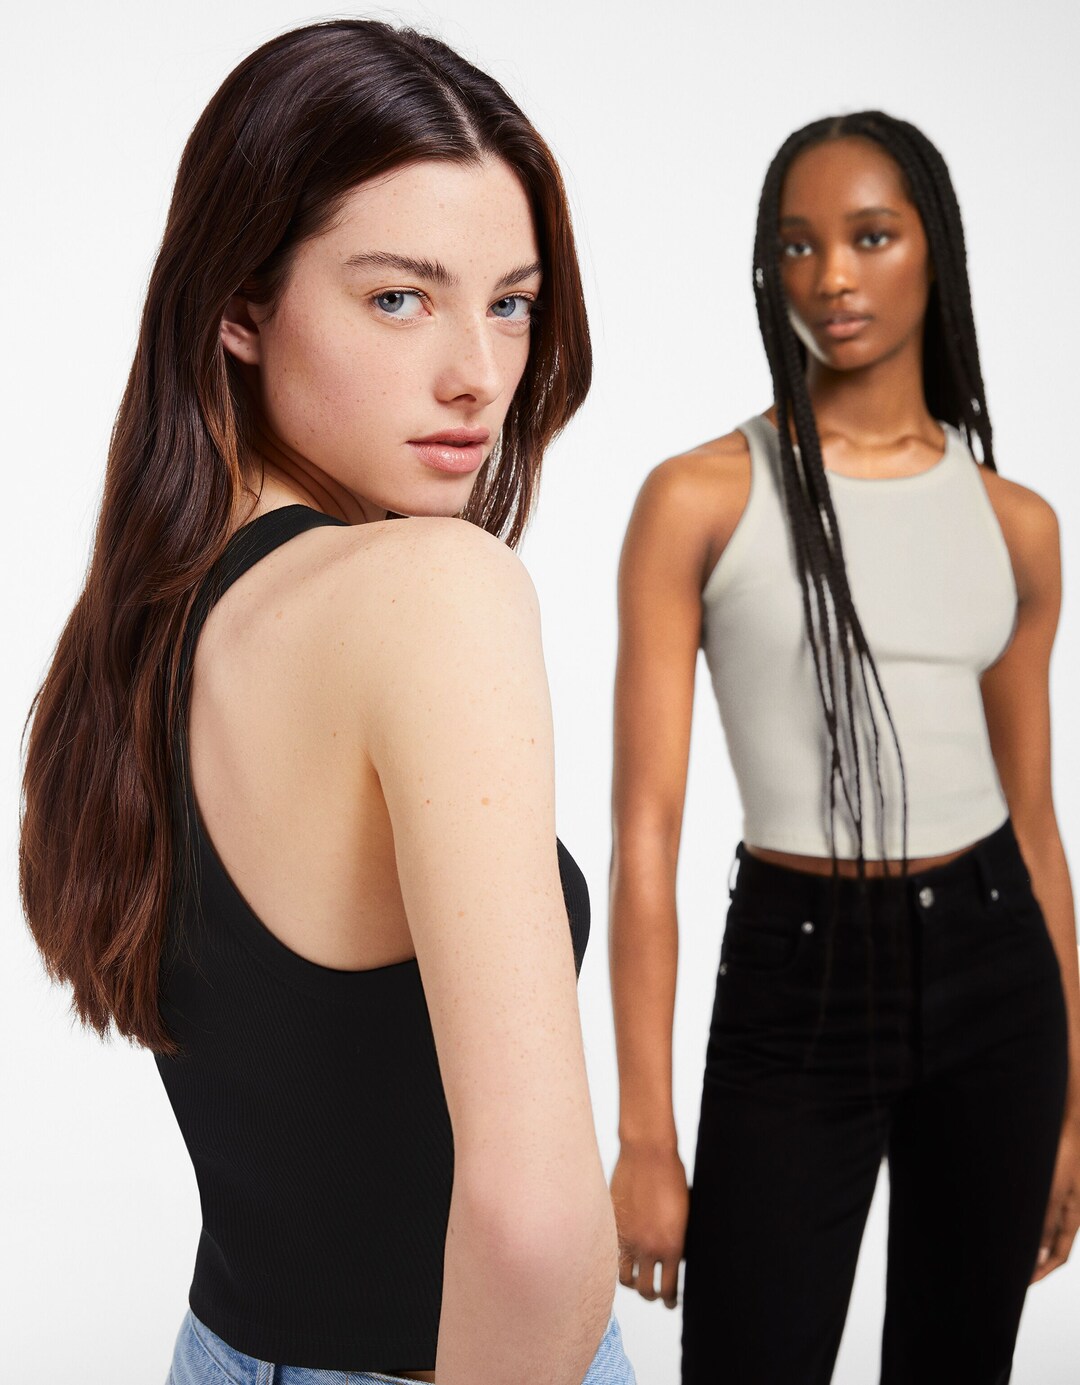 2-pack of sleeveless ribbed tops.